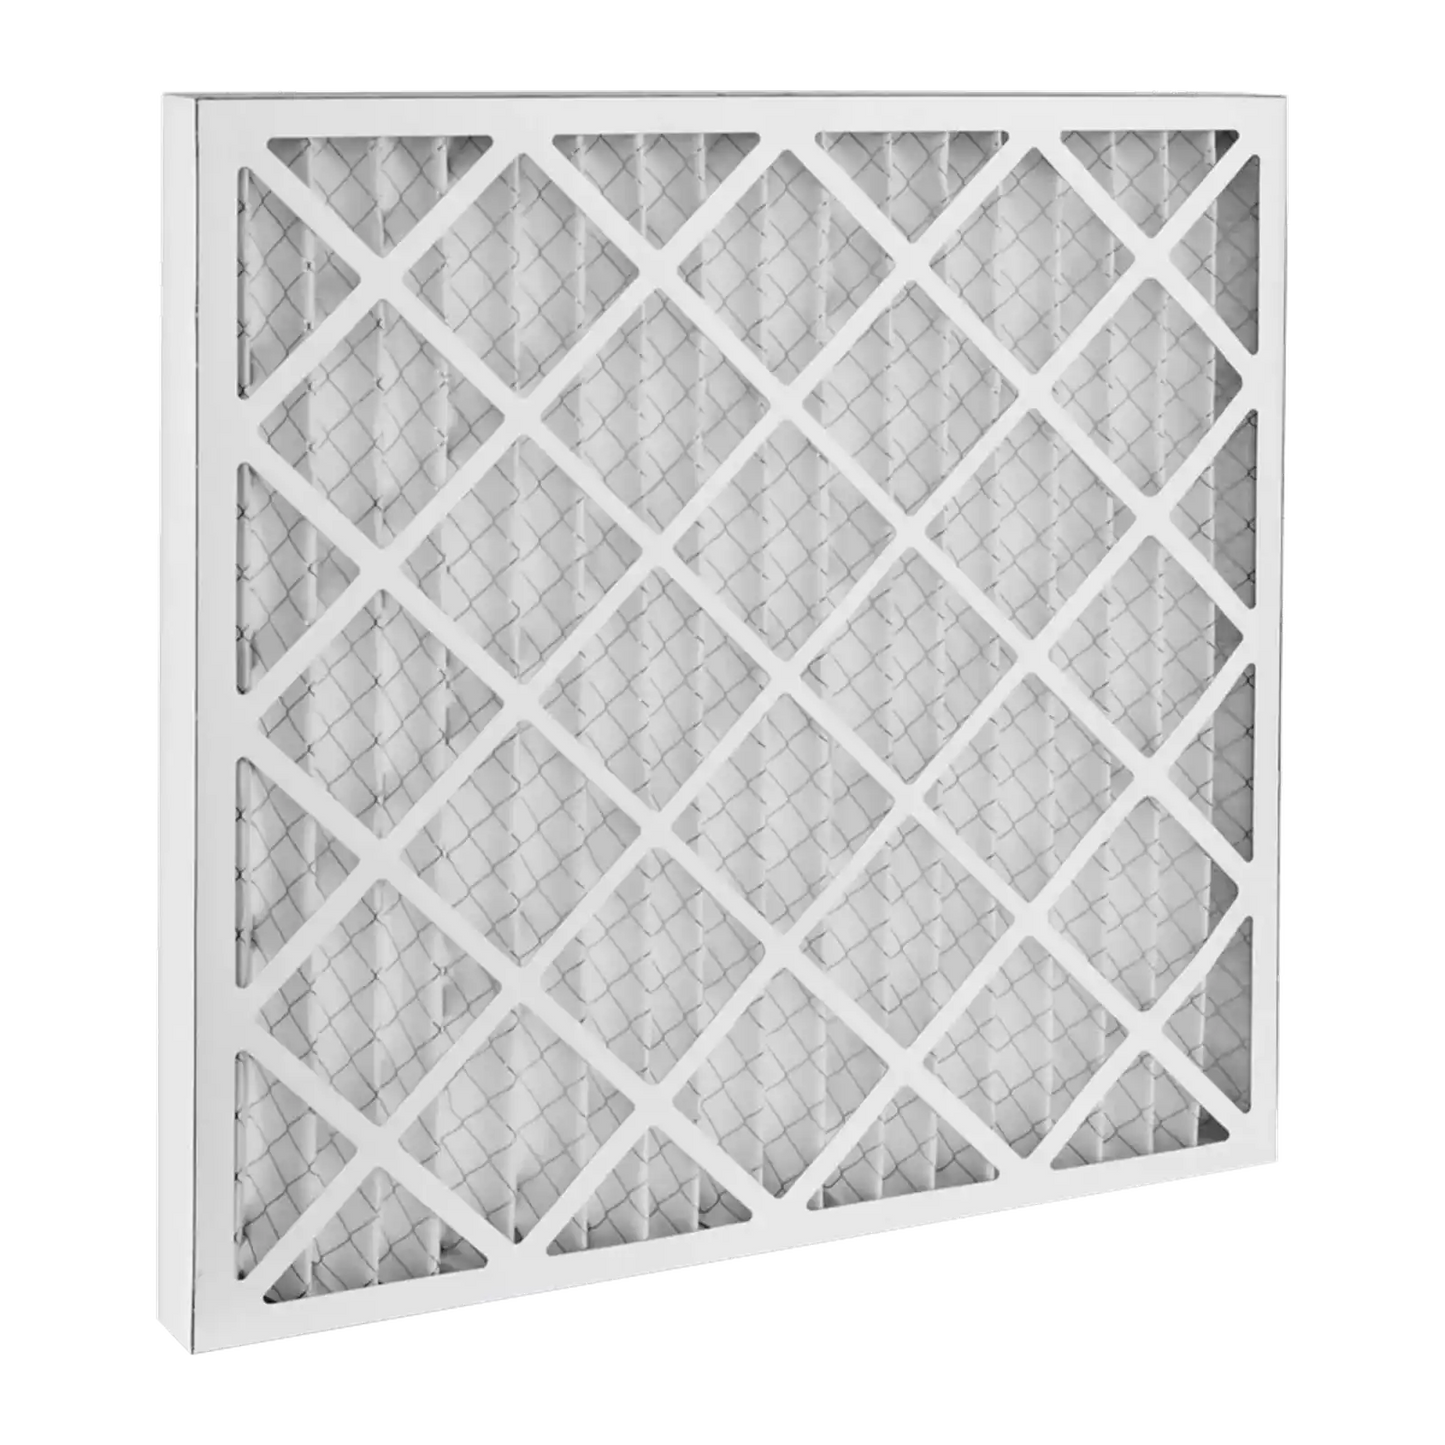 Dafco 20x30x1 Furnace AC Filter - Case of 12